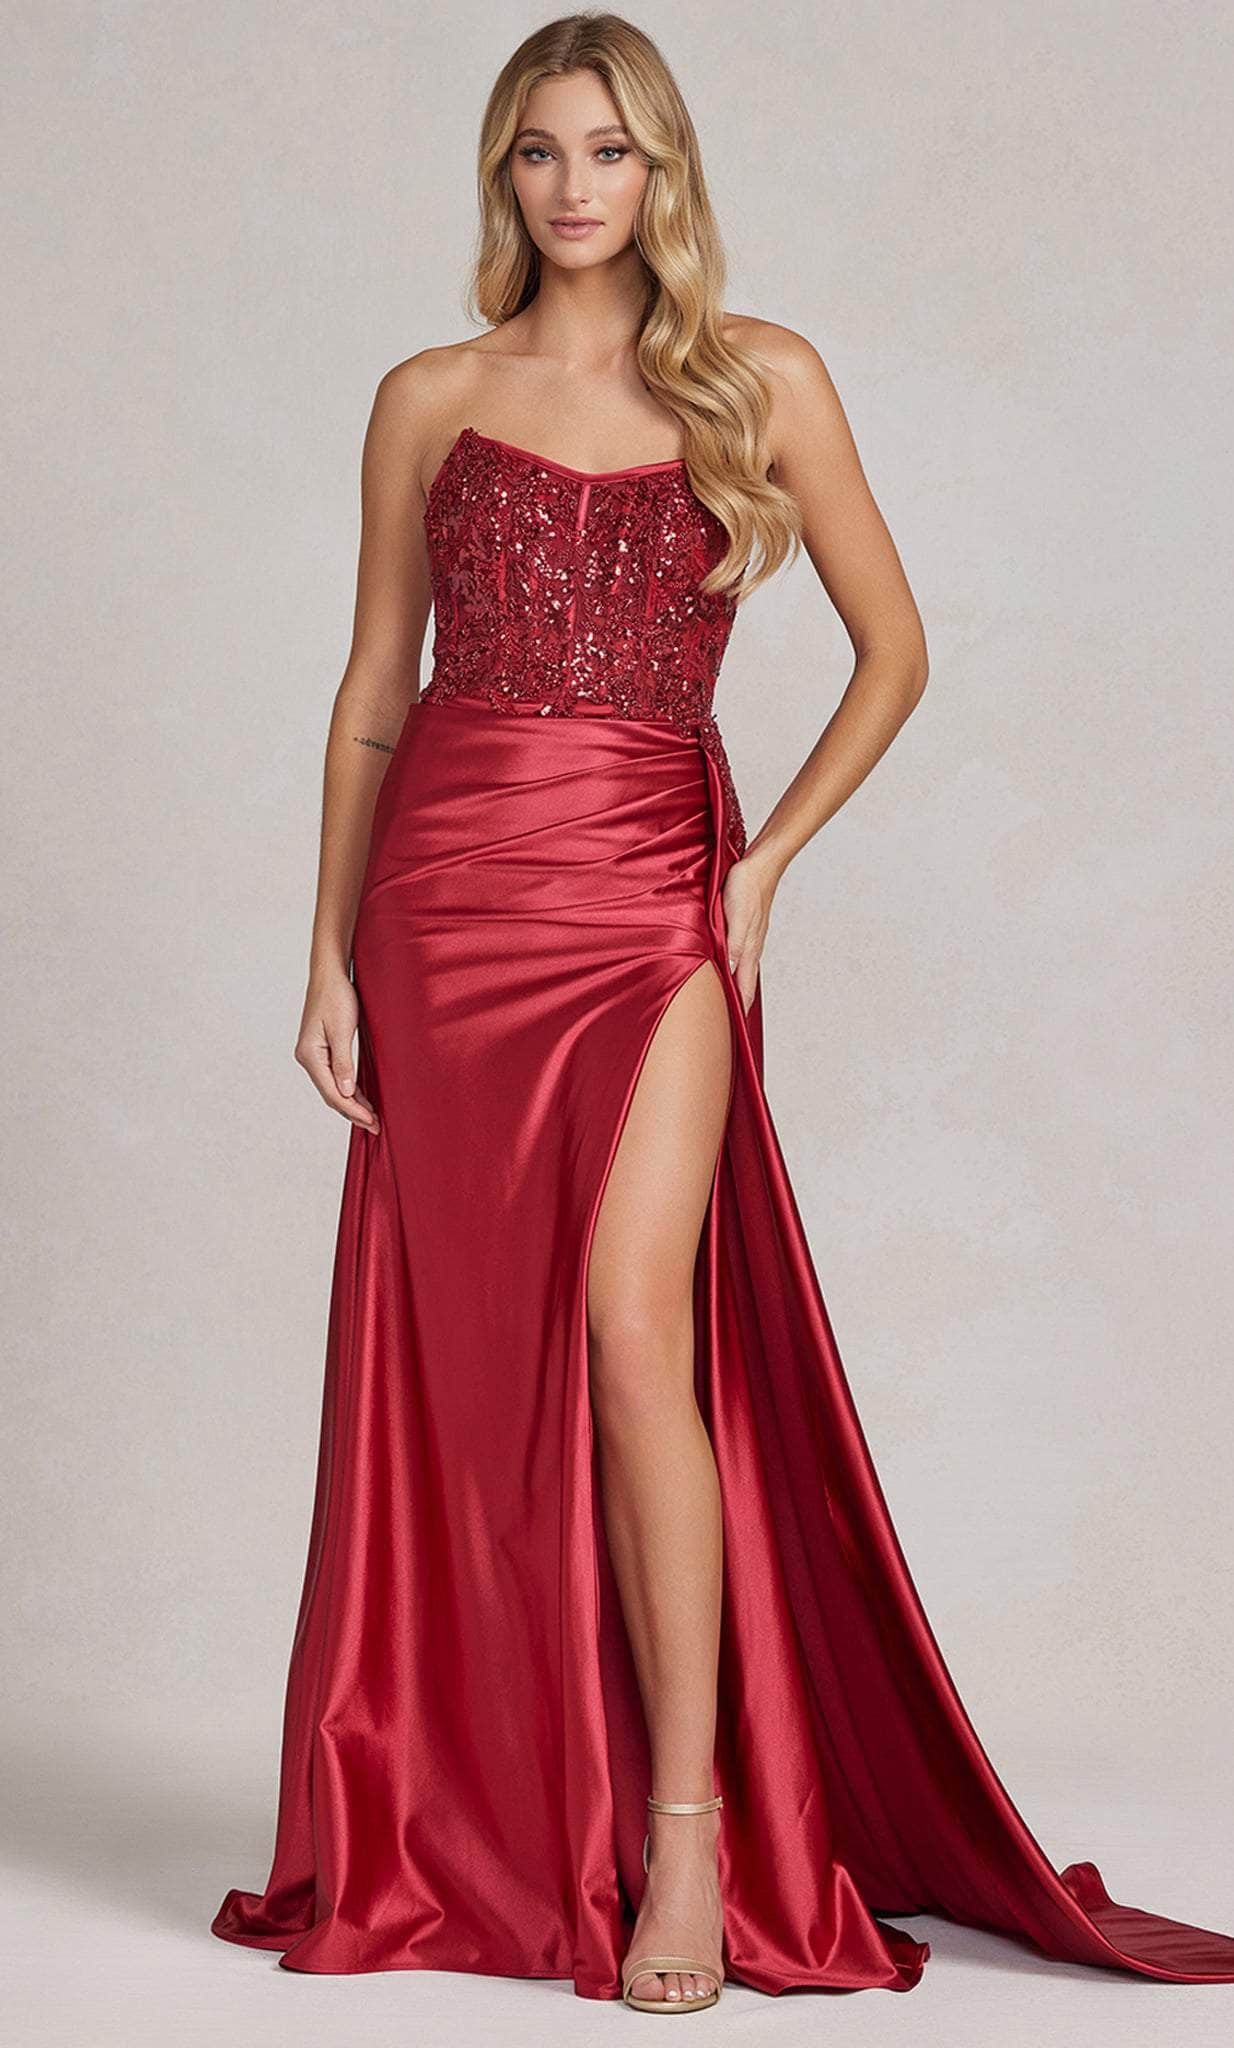 Image of Nox Anabel E1174 - Beaded V-Neck Prom Gown